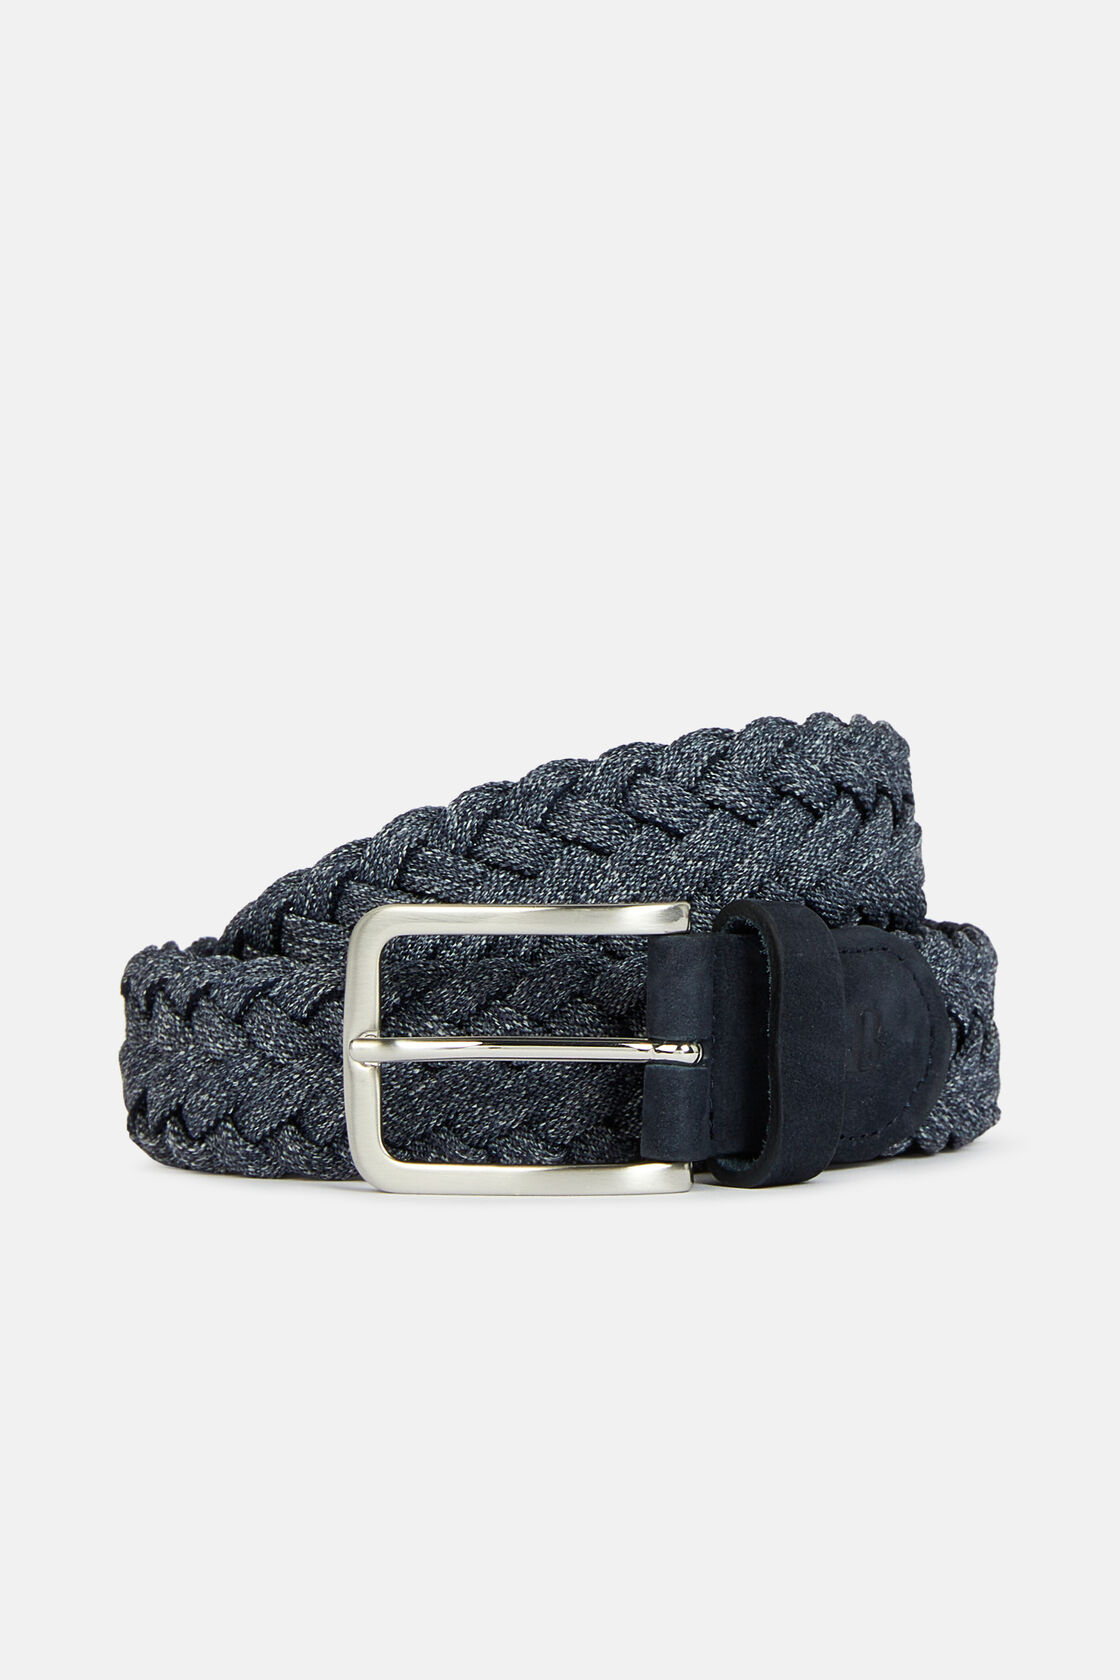 Stretch Woven Belt In Technical Yarn, Navy blue, hi-res